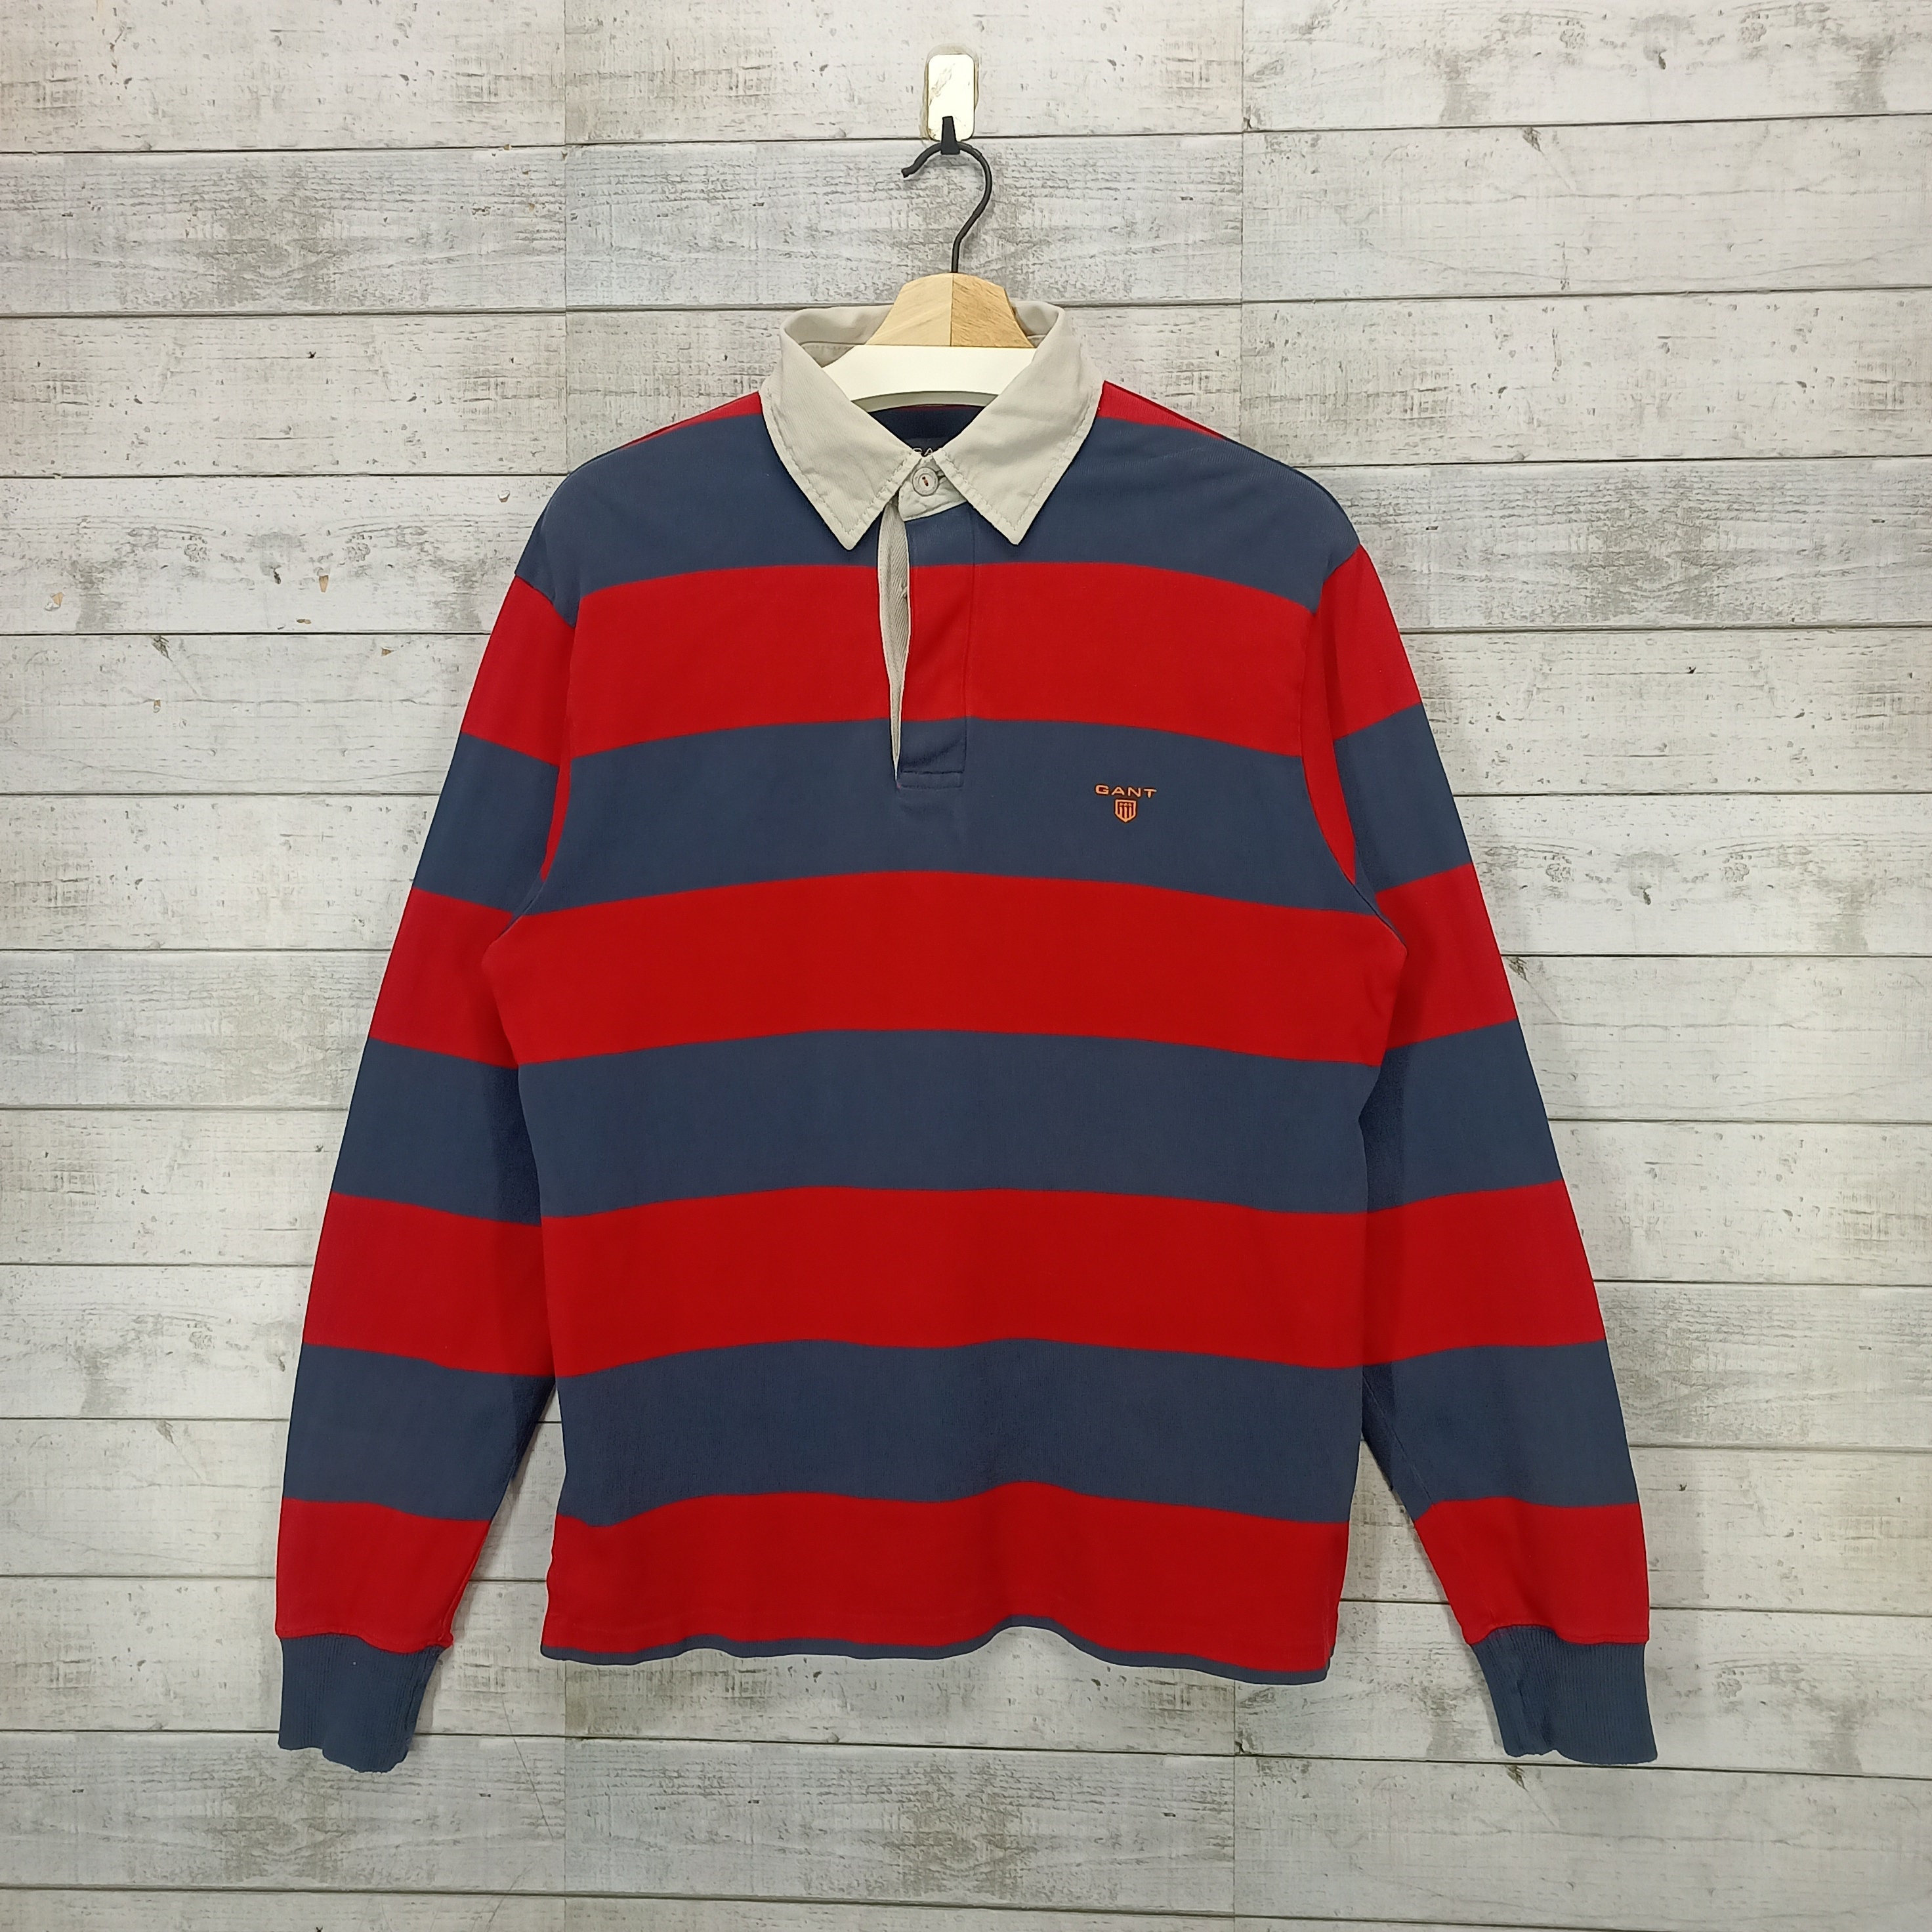 GANT Polo Rugby Shirt, Vintage Polos Top Tee Jumper, Striped Color